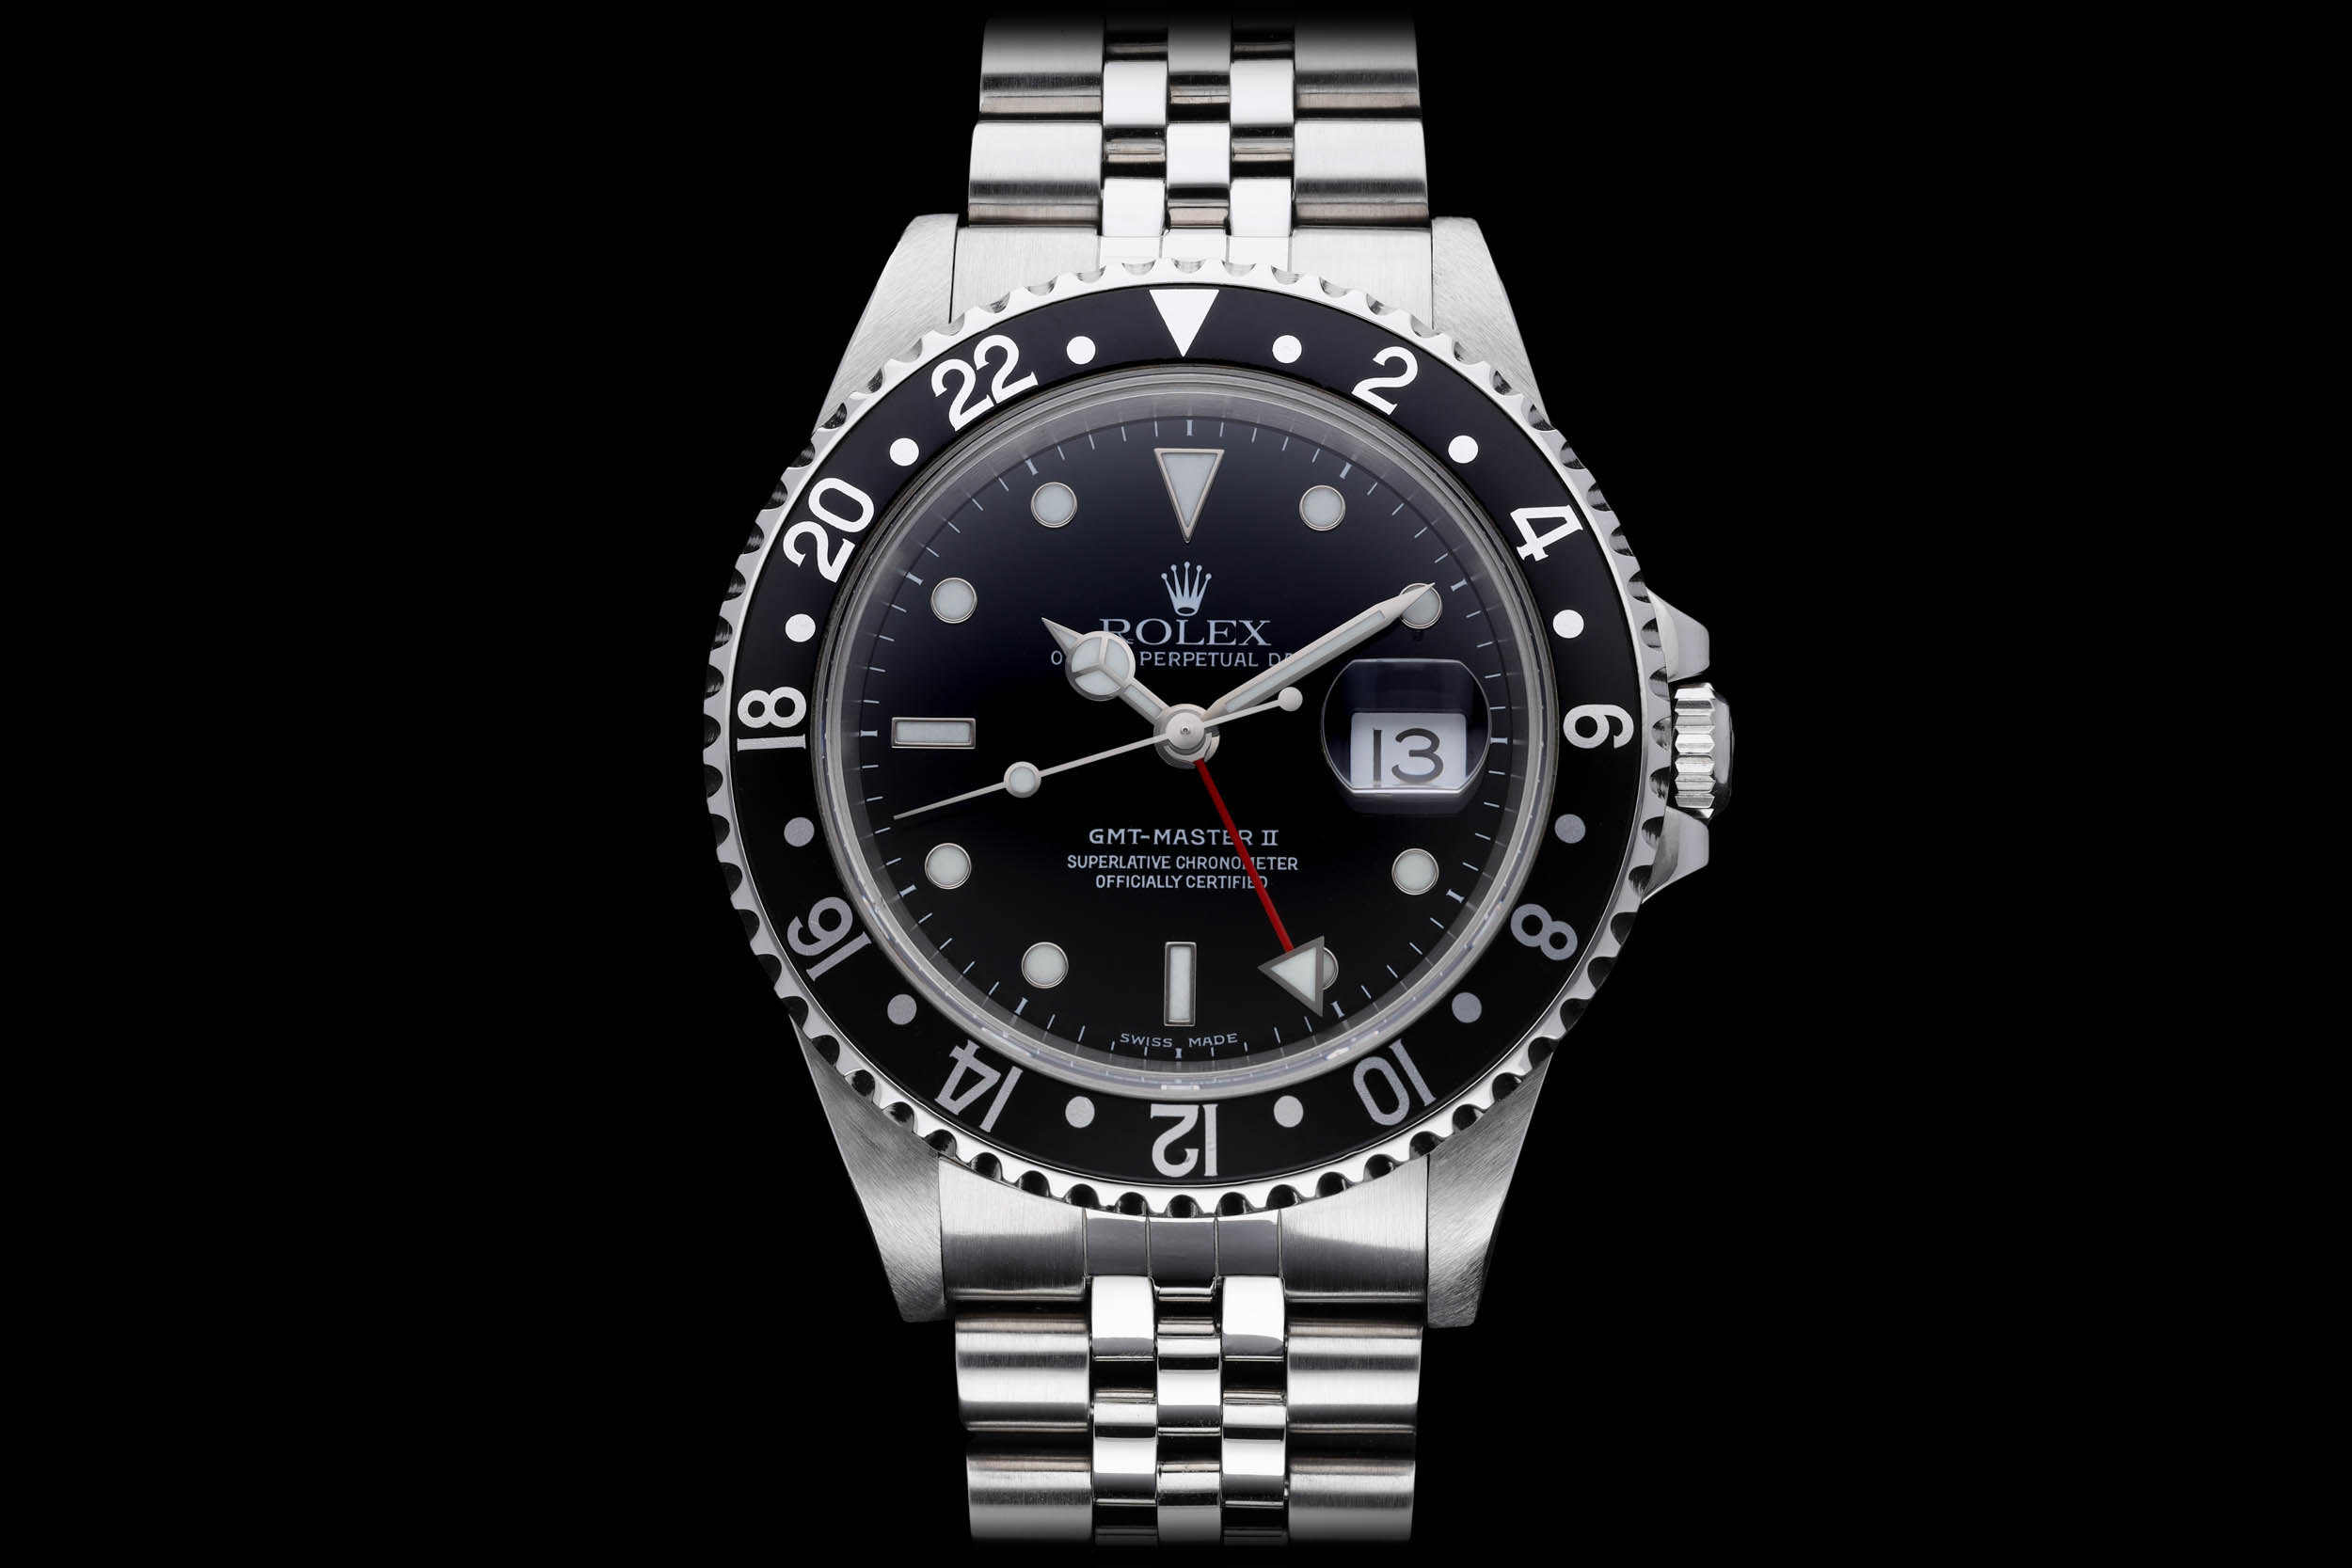 Picture of a Rolex watch, taken by Andrea Fabrizi, a jewellery photographer in London specialising in vintage watches.